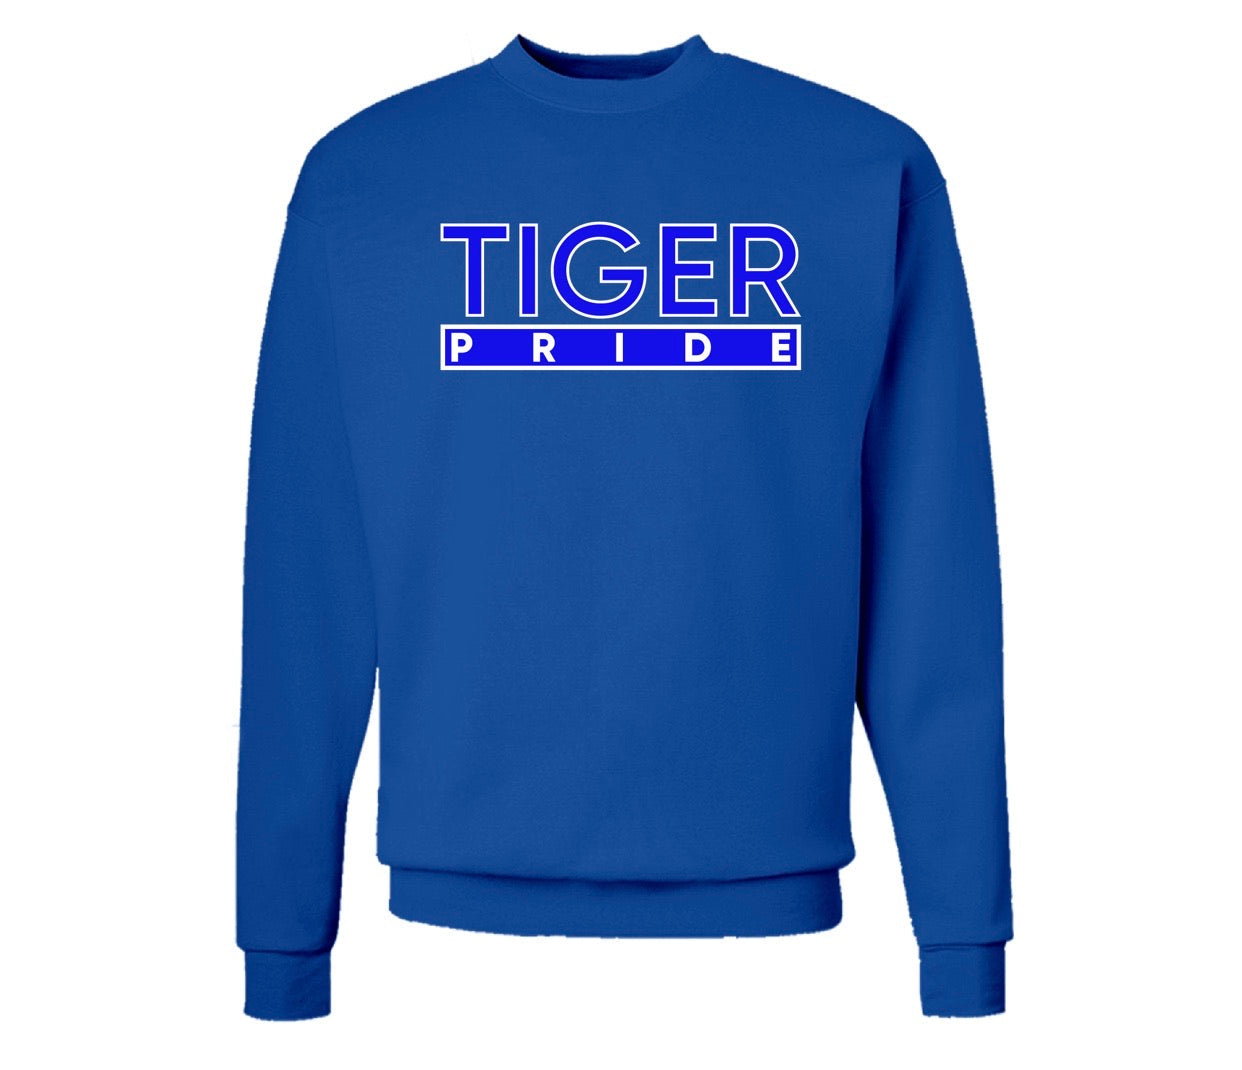 The “Tiger Pride” Hoodie in Royal Blue/White (TN)